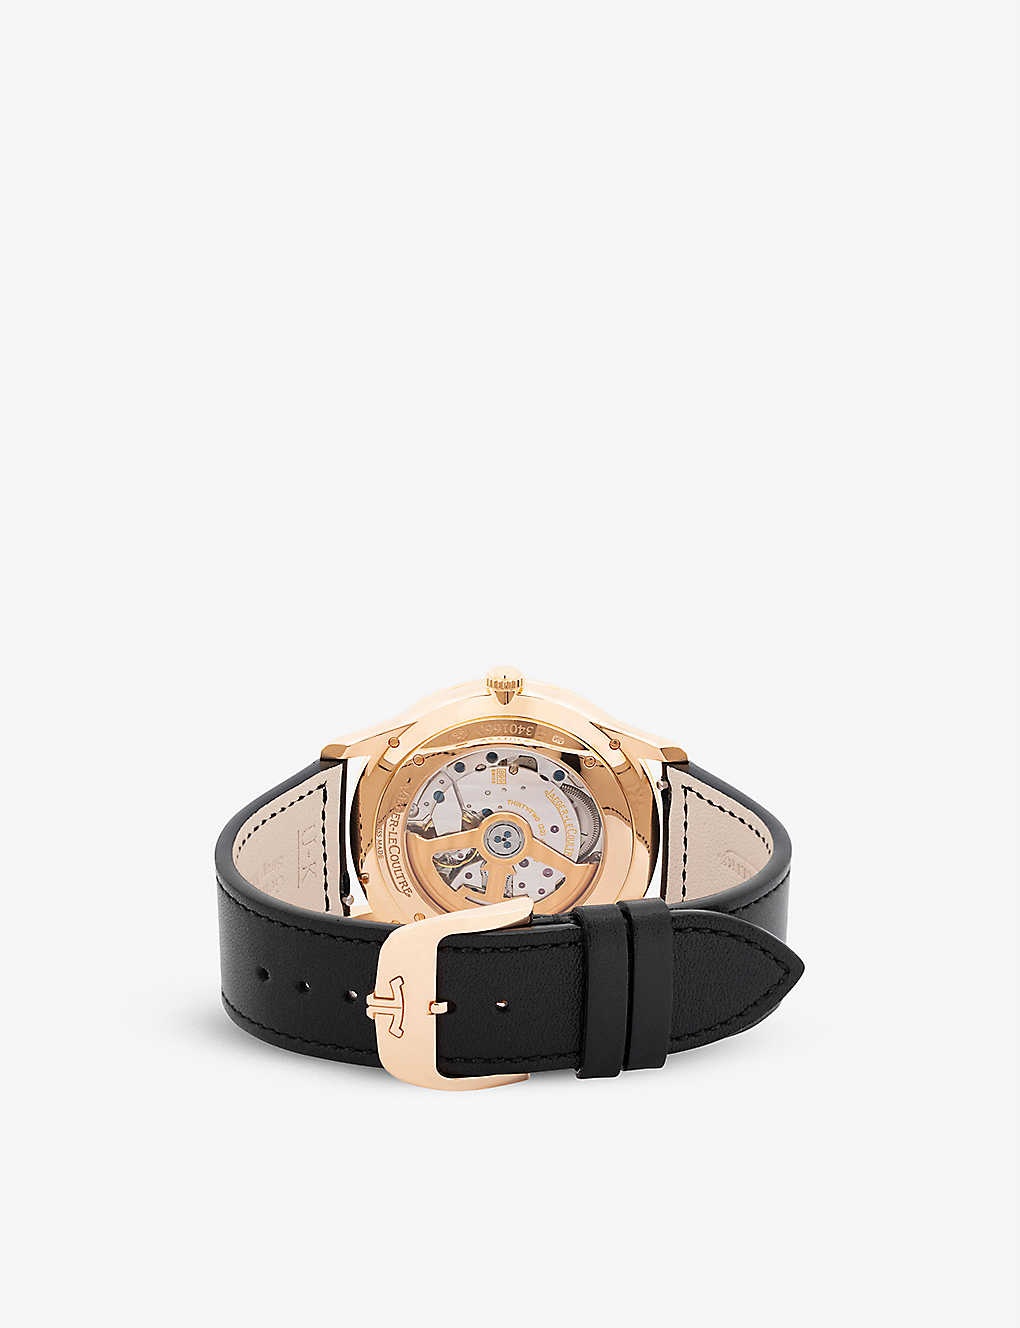 Q1232501 Master Ultra Thin rose-gold, 0.85ct diamond and calfskin-leather watch - 5